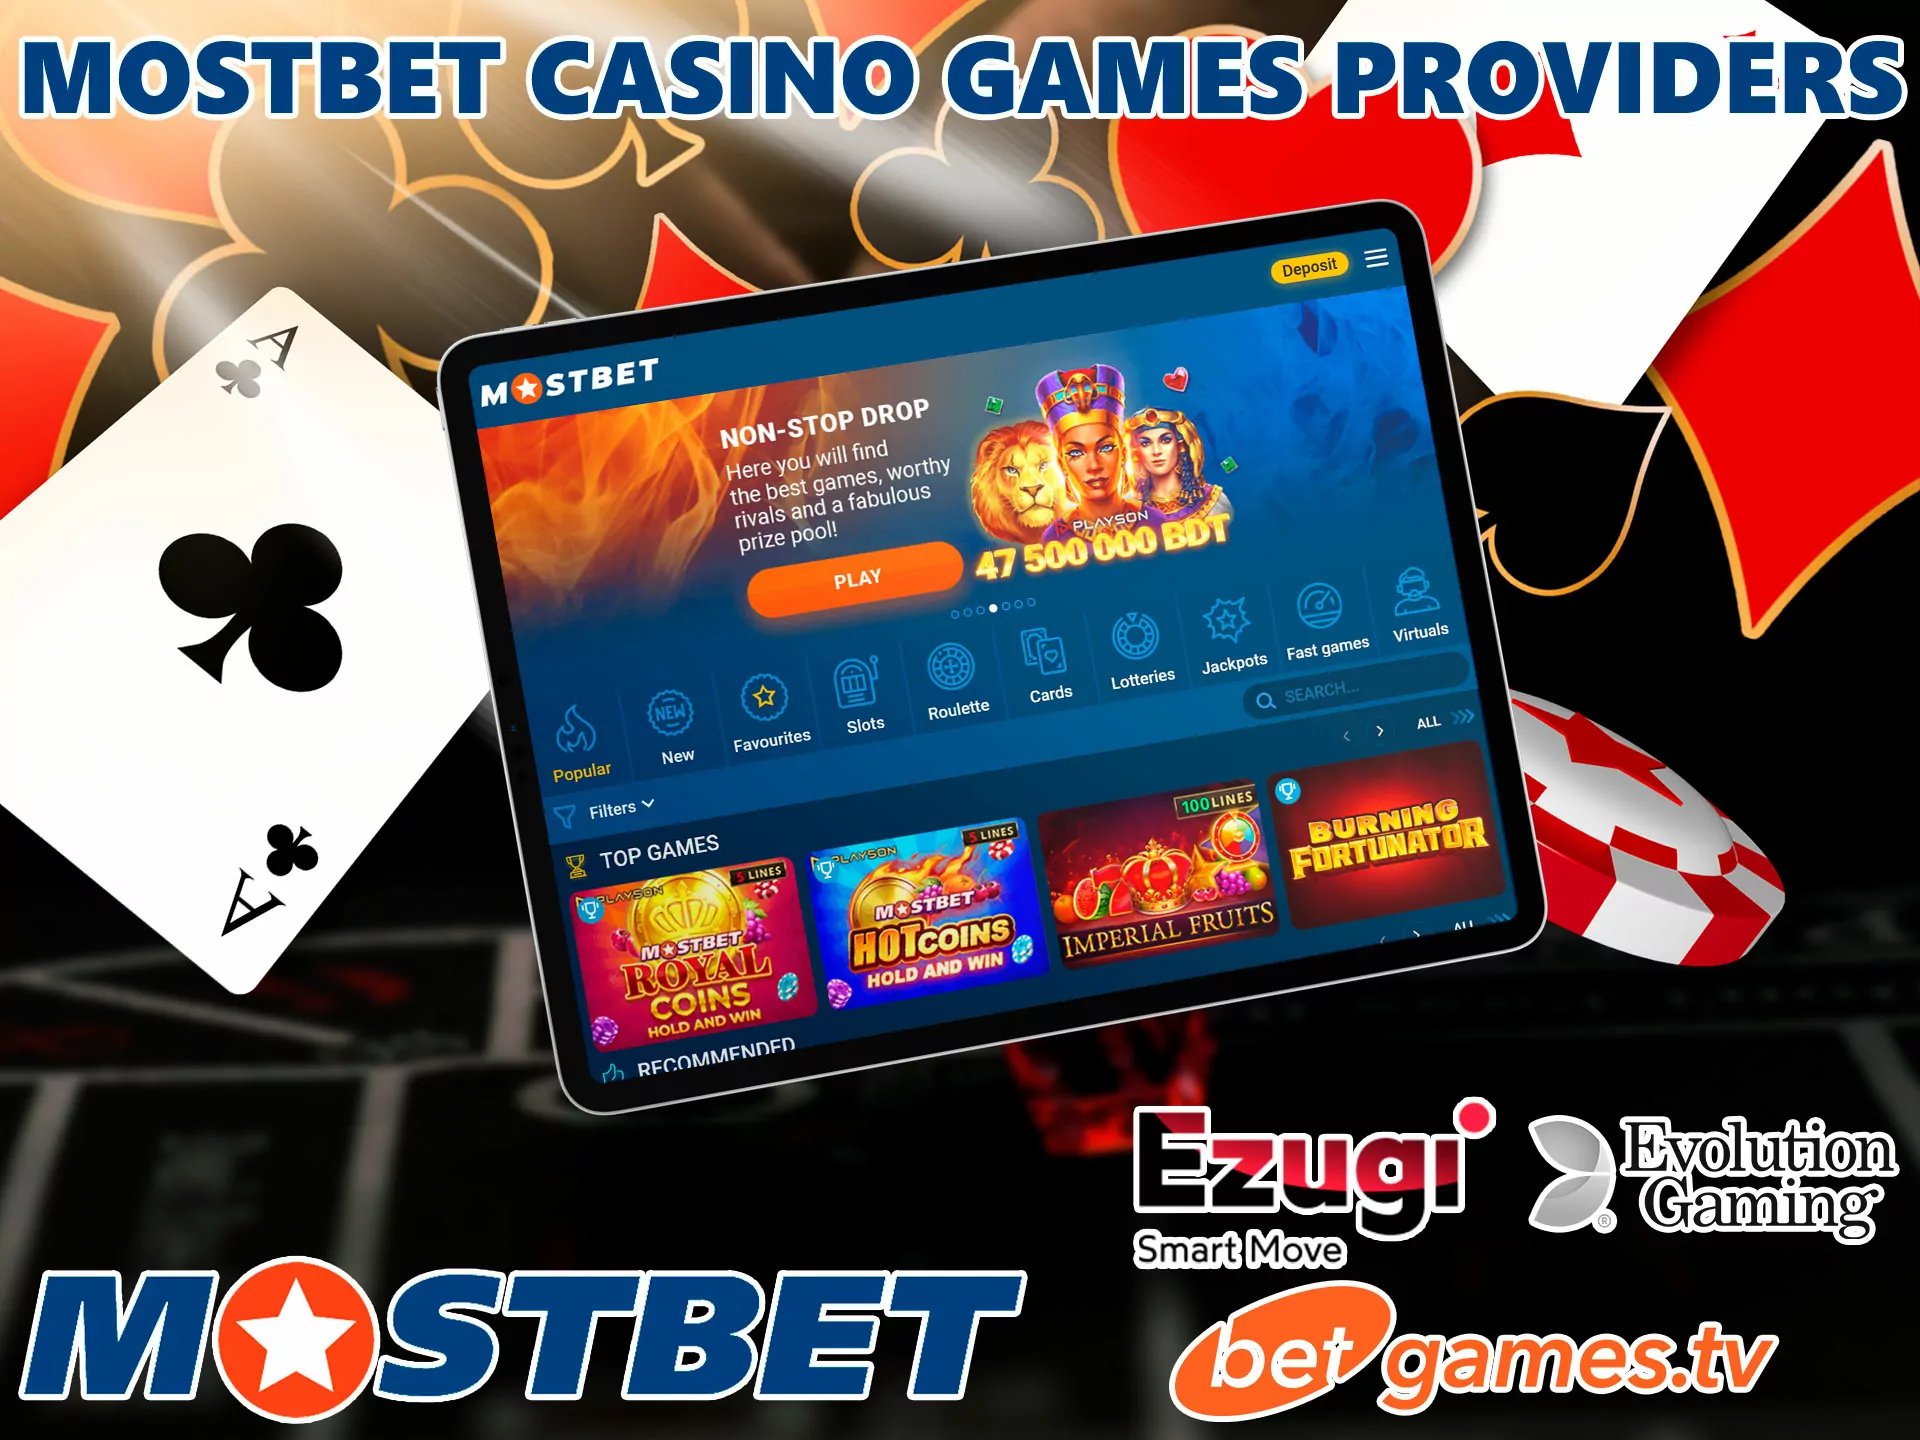 The casino offers only verified suppliers services, you will find high-quality software from such giants as: Ezugi, Evolution Gaming, Skywind Live, and many others.